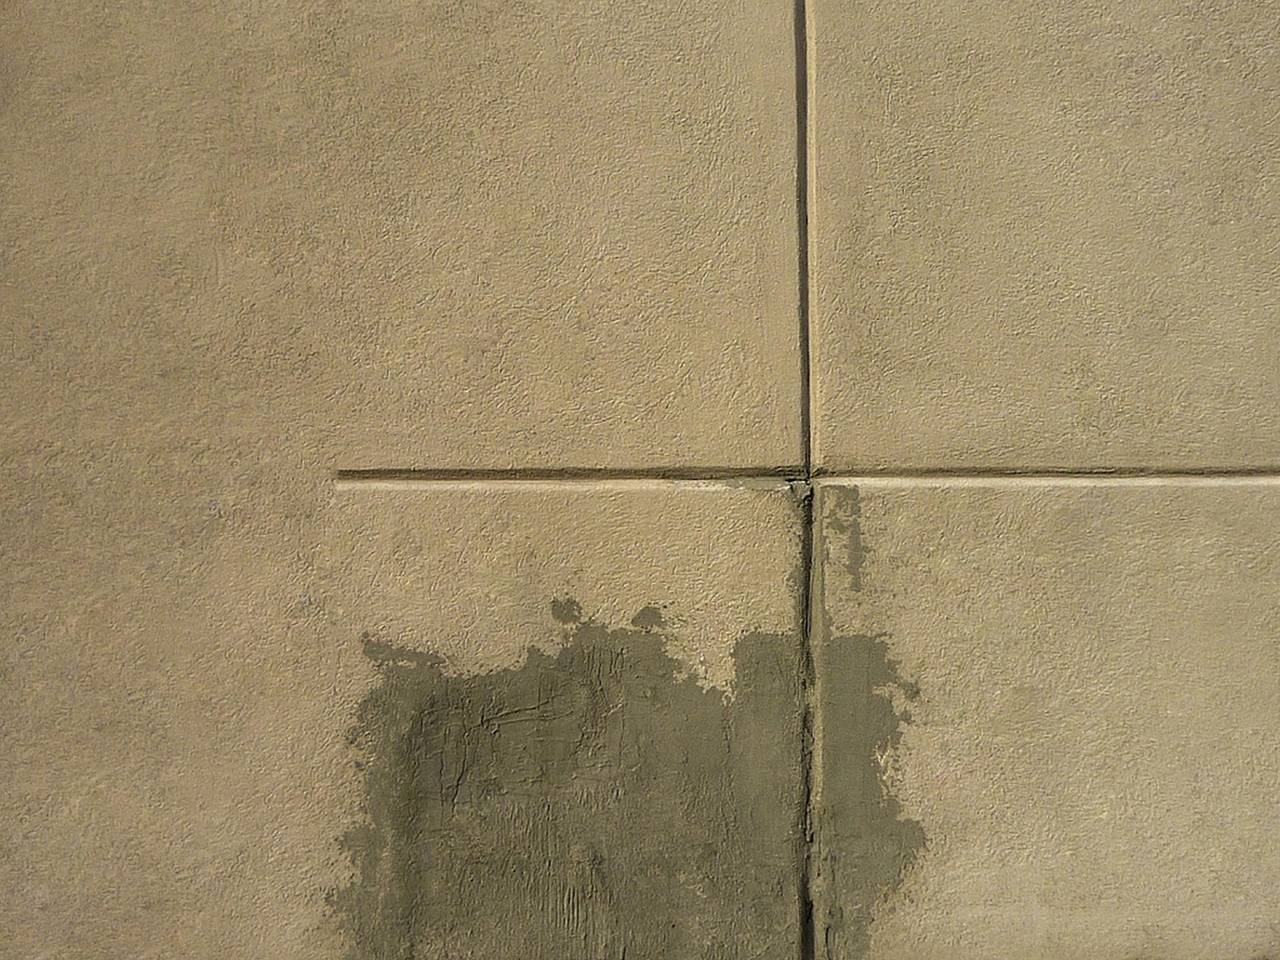 Cross within Beige & Grey     [St. Charles, 2012] - Photograph by John Fraser